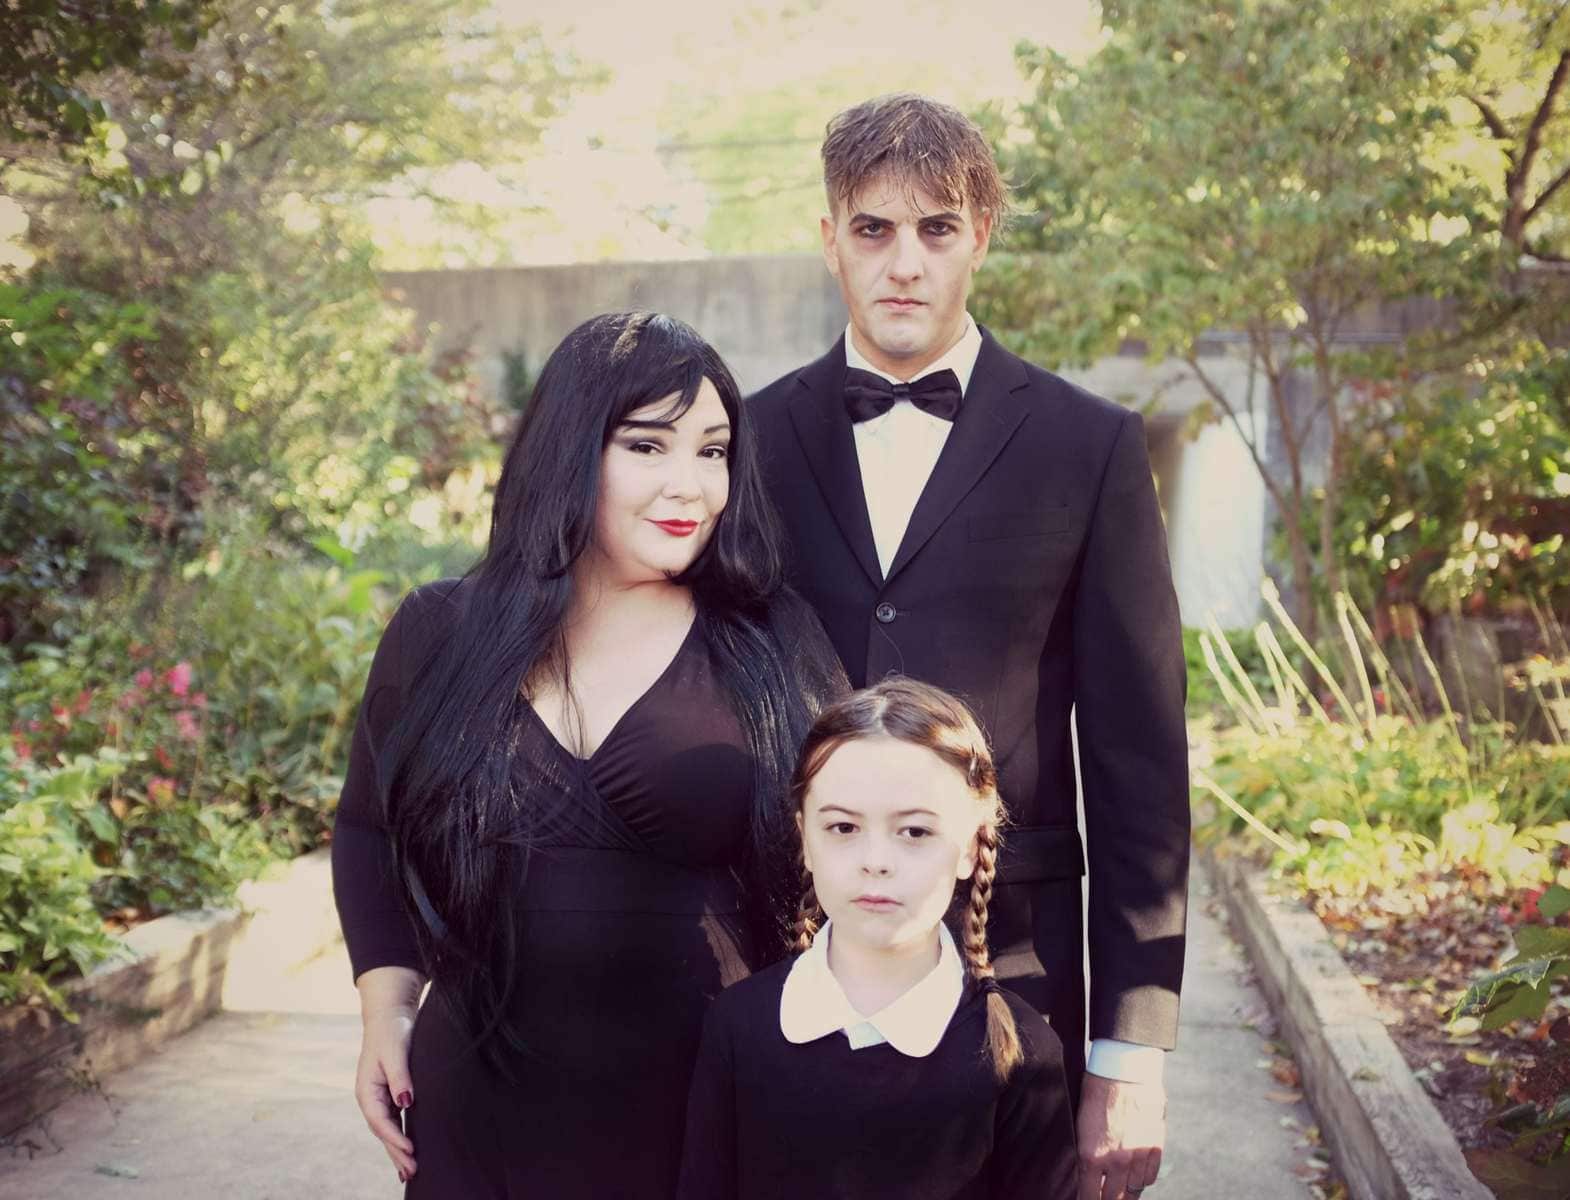 Family Addams Family Costume for Halloween